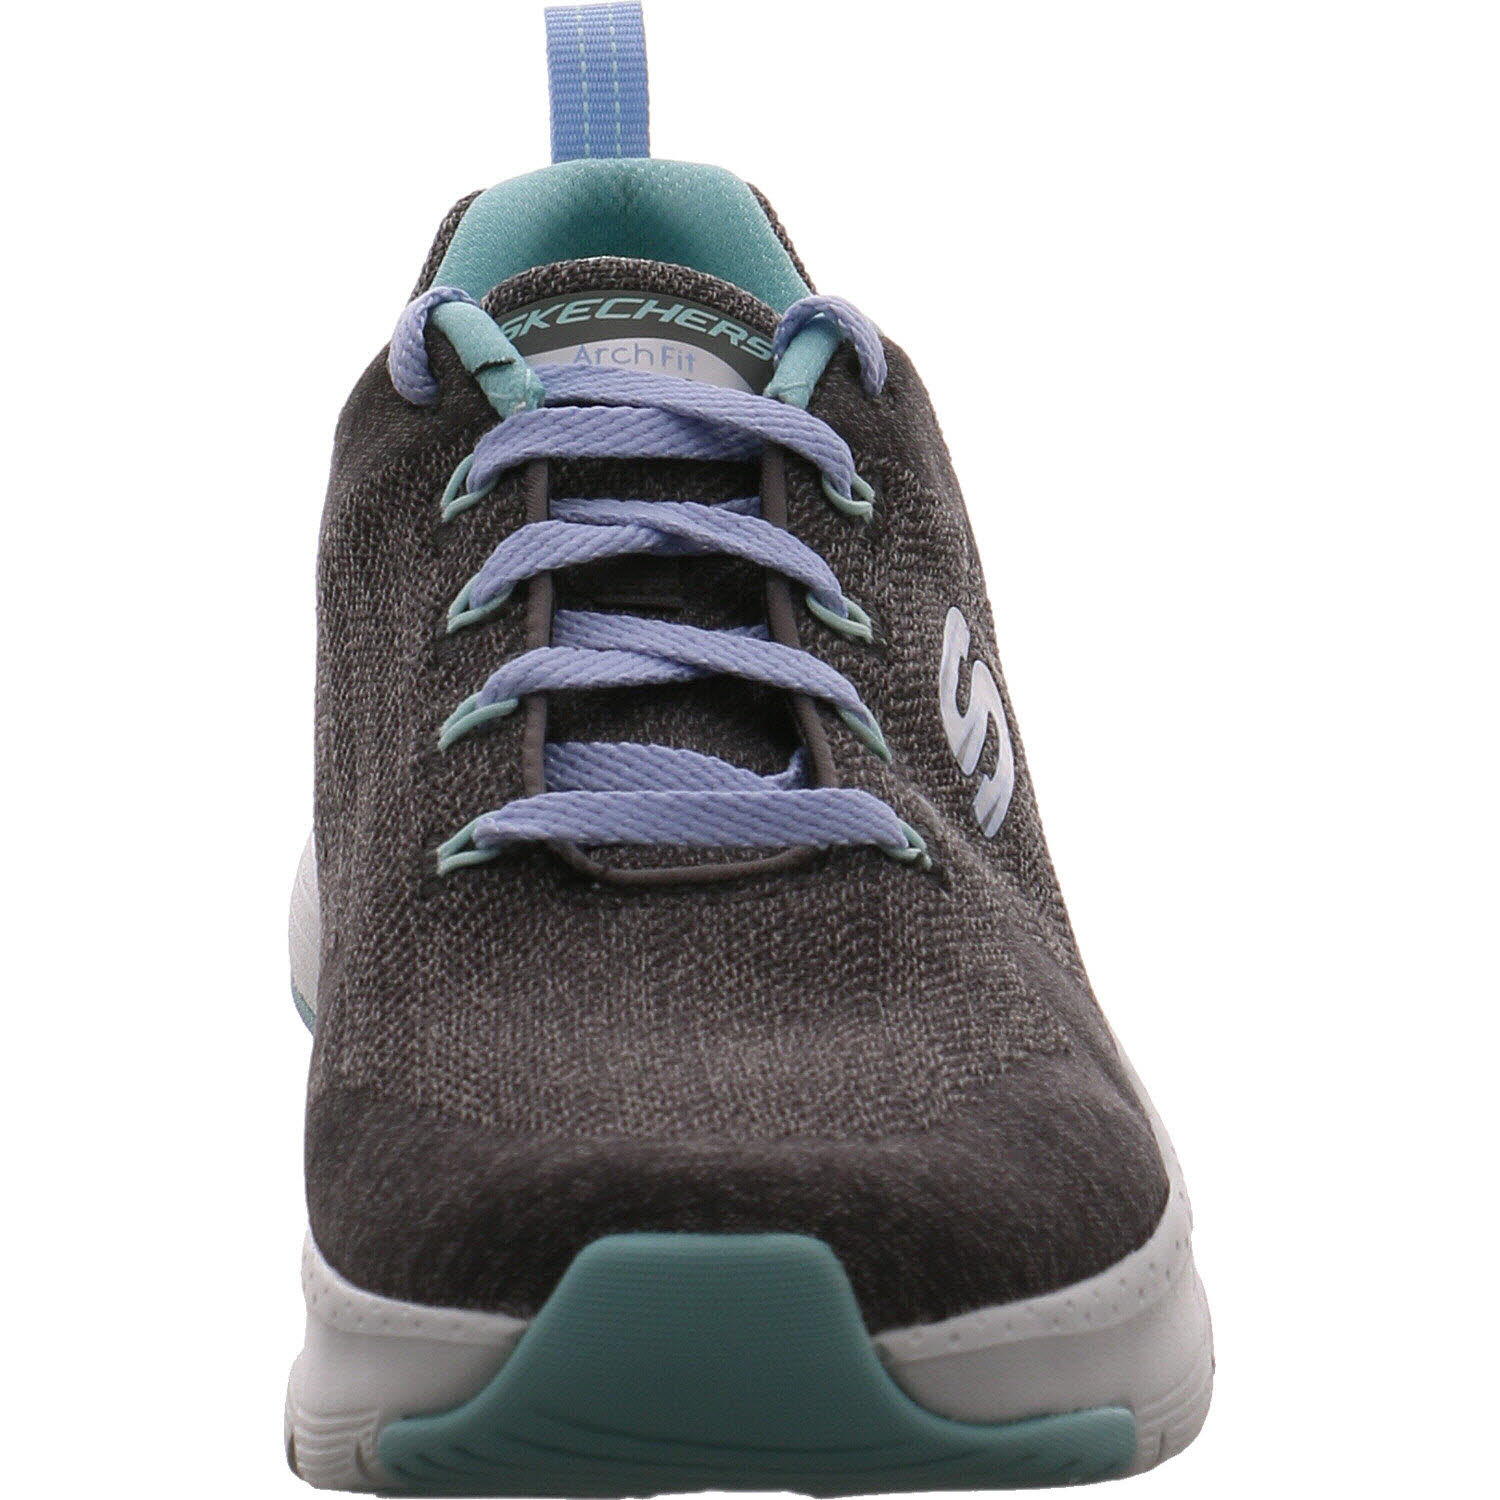 Skechers Sneaker low Arch fit comfy wave